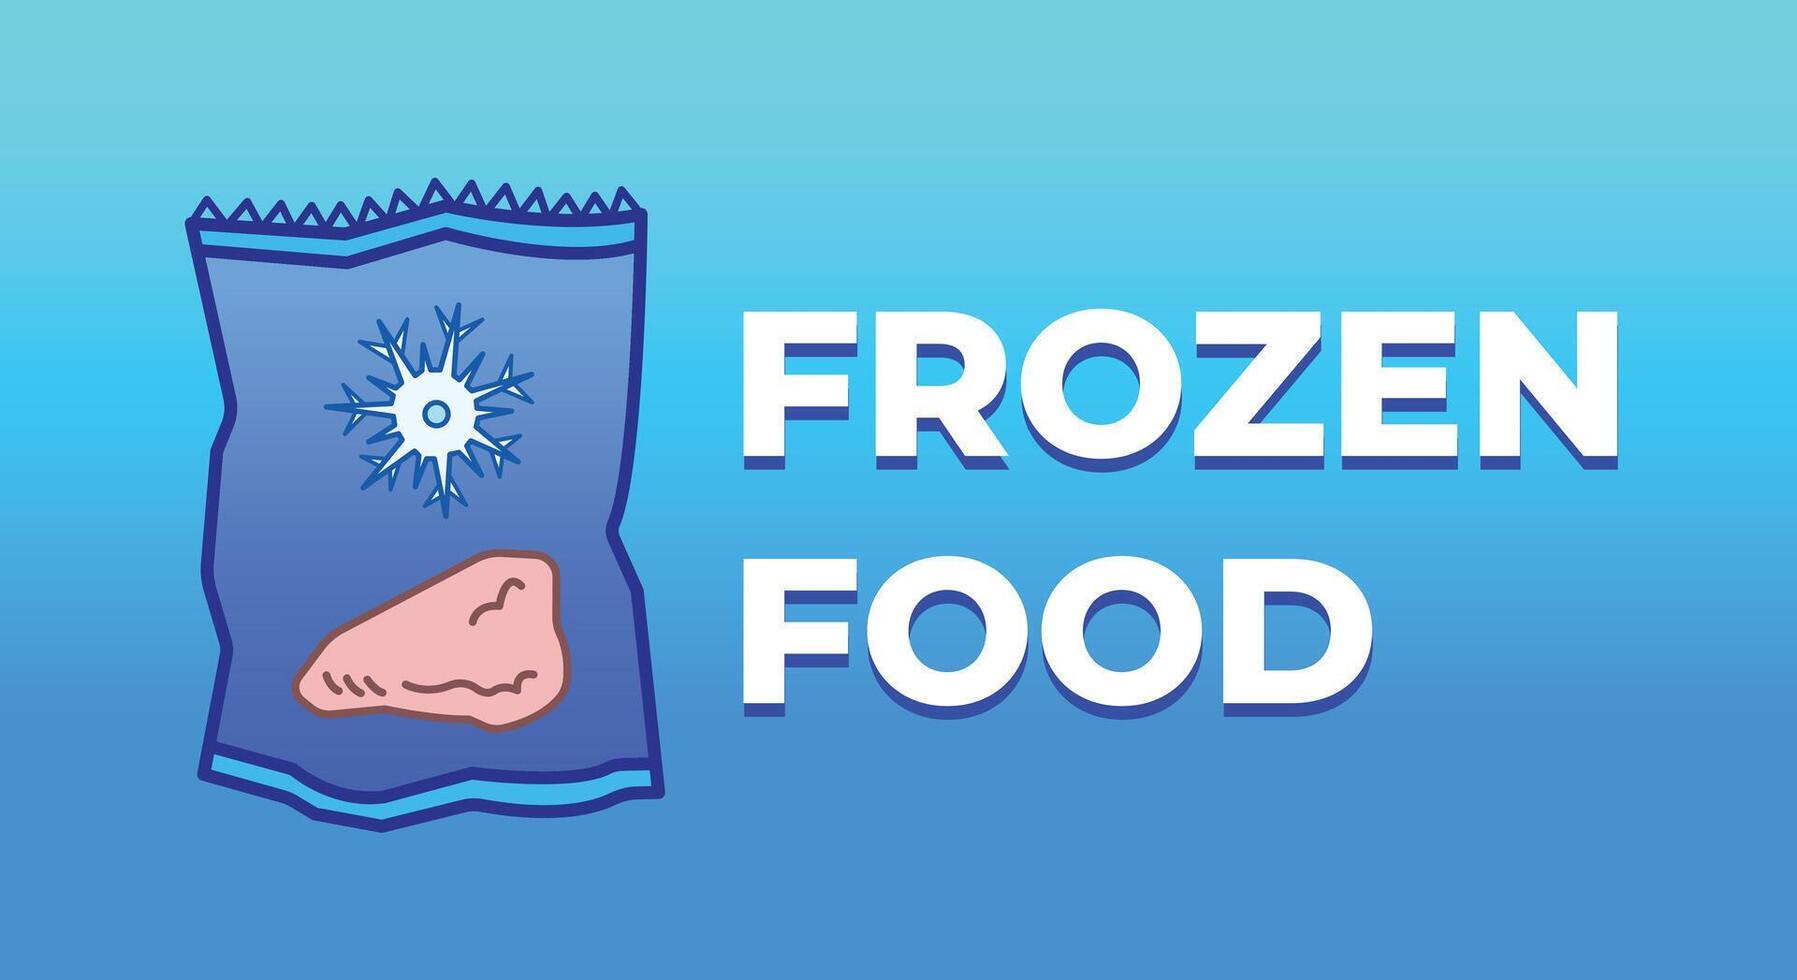 Frozen food supermarket banner poster sign age illustration isolated on horizontal gradient blue background. Simple flat styled drawing. vector